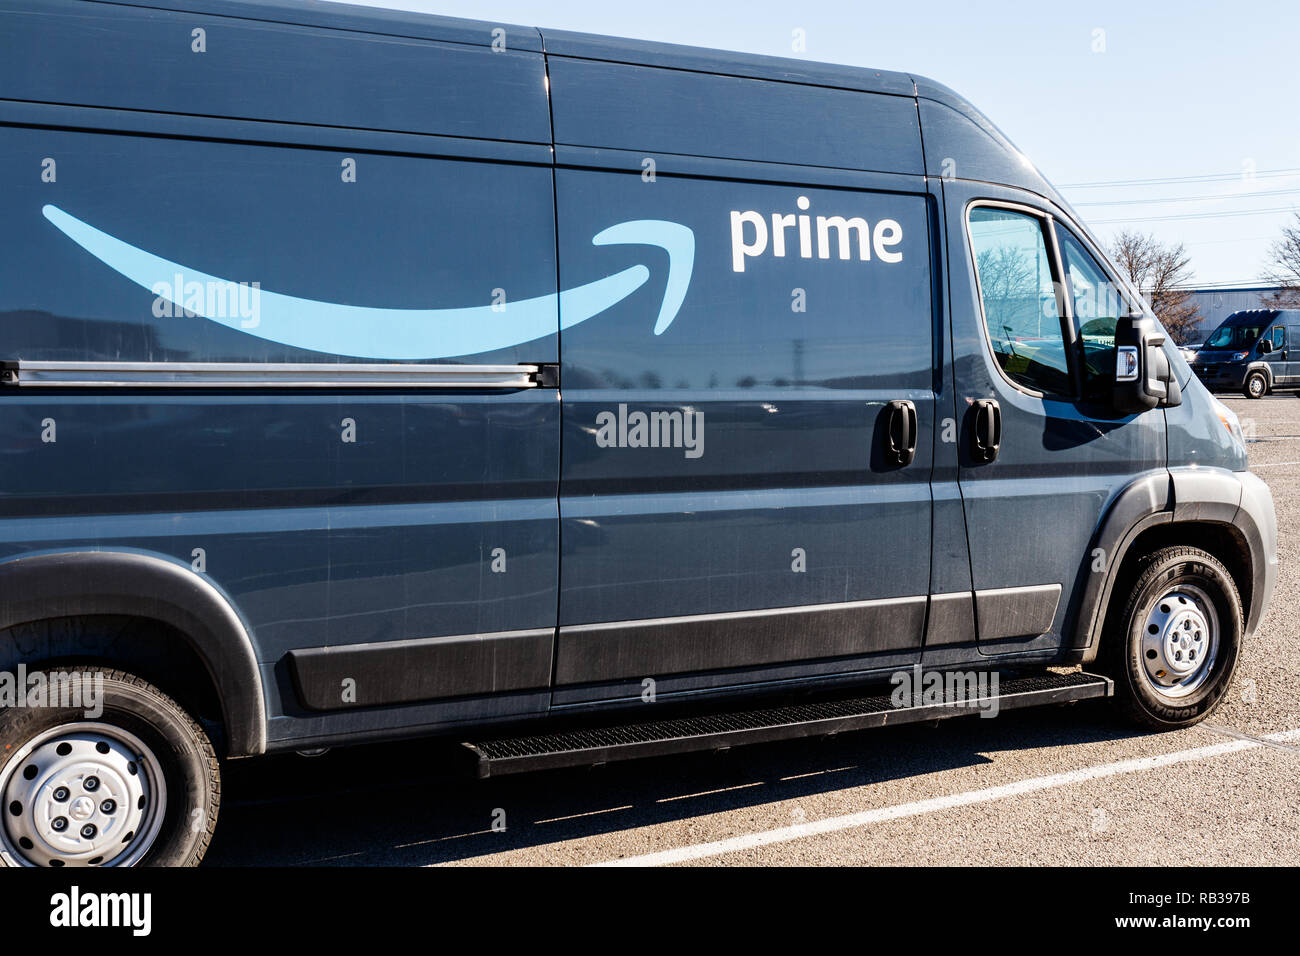 Indianapolis - Circa January 2019: Amazon Prime delivery van. Amazon.com is  getting In the delivery business With Prime branded vans IV Stock Photo -  Alamy